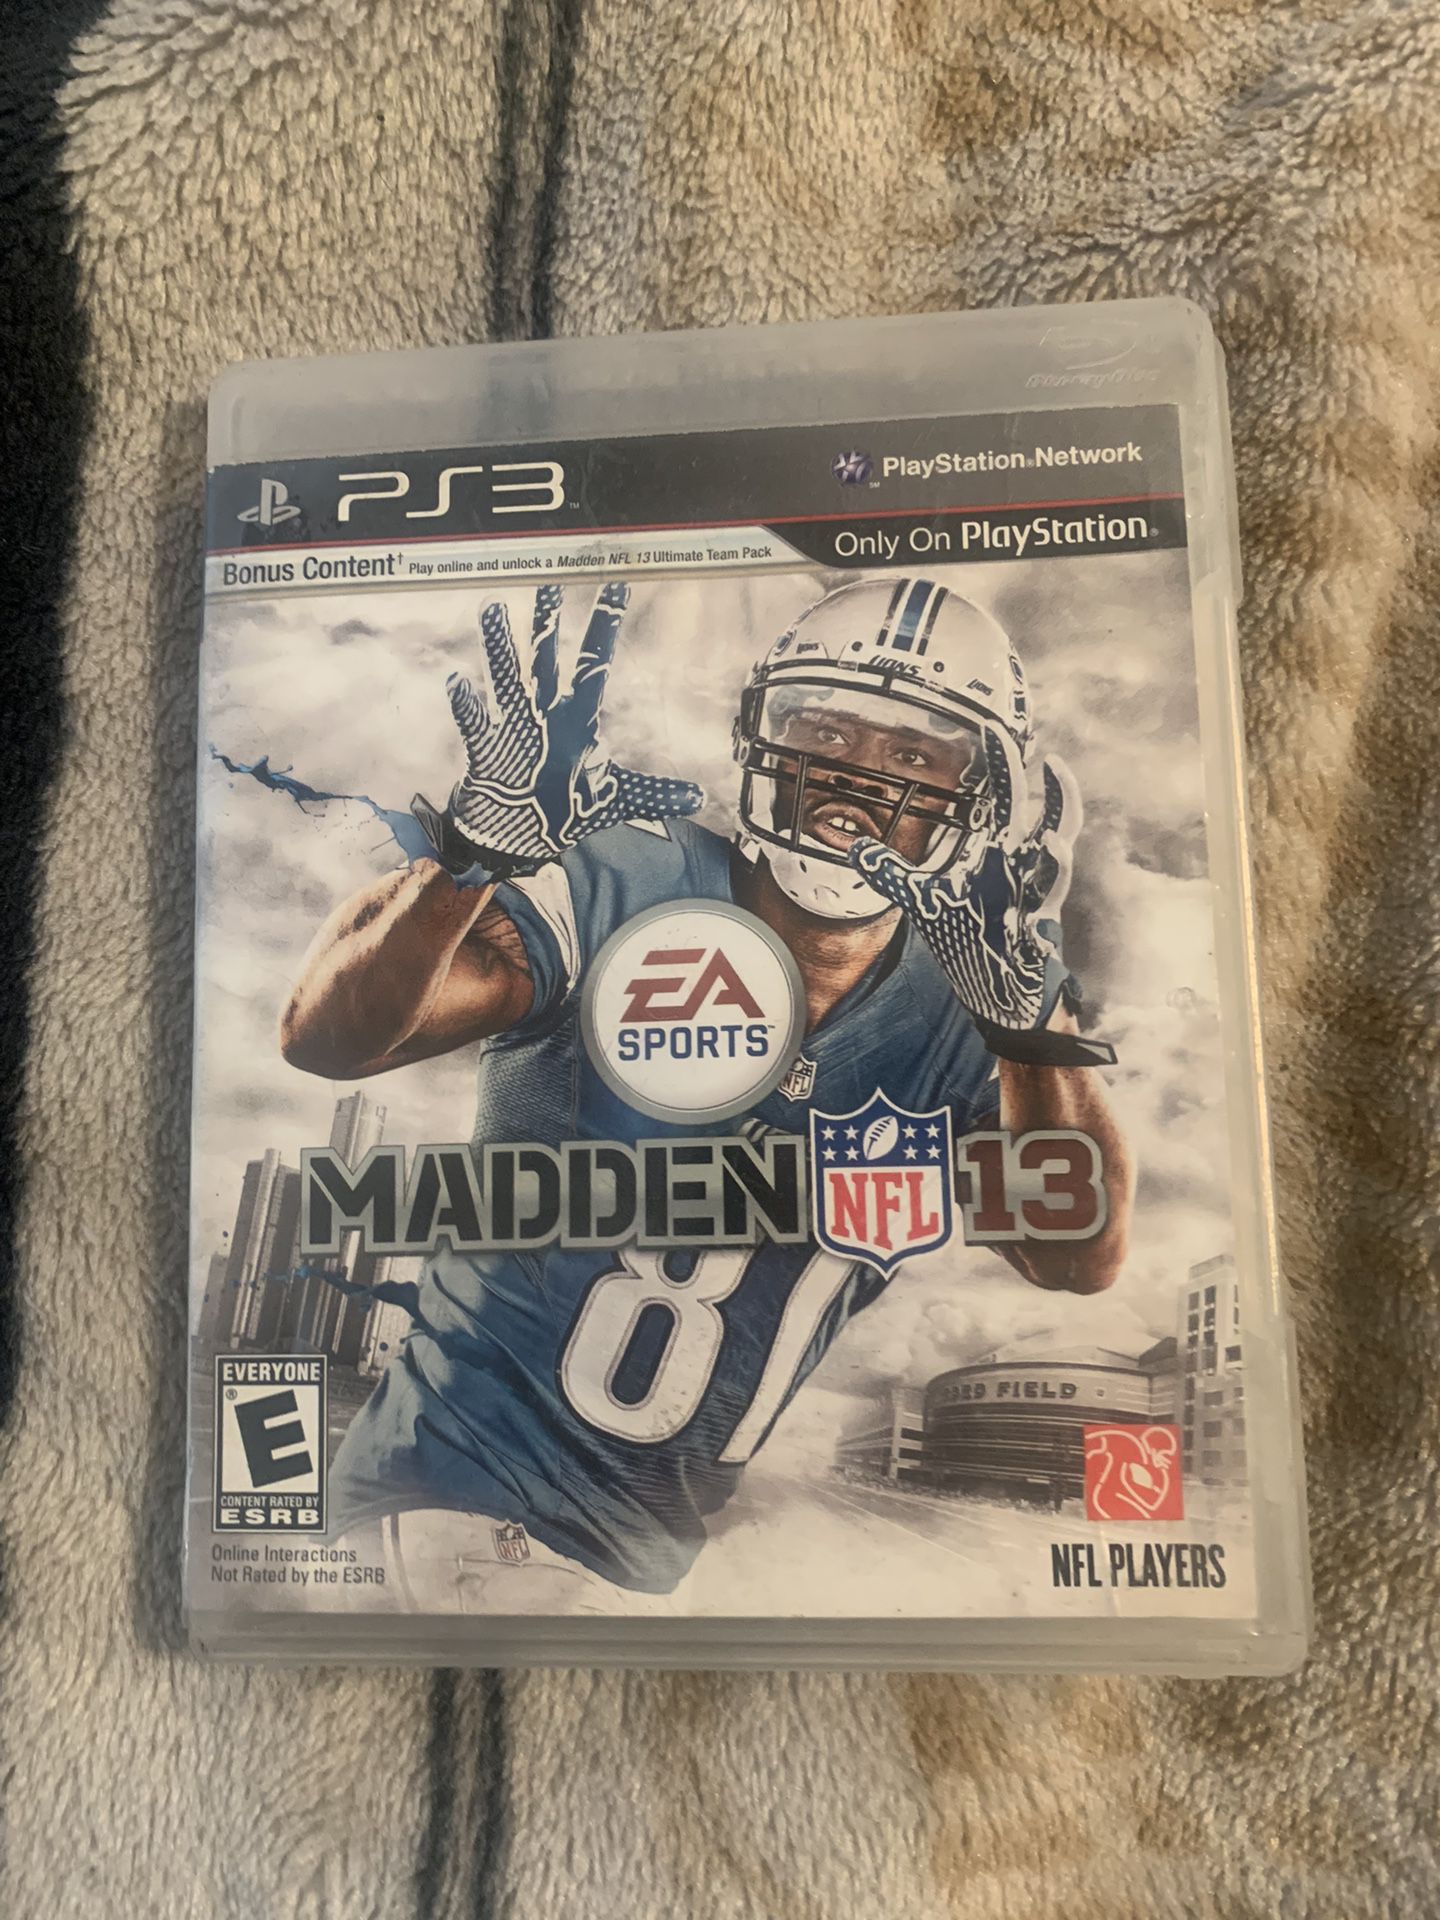 Madden 13 for PS3 with case and game